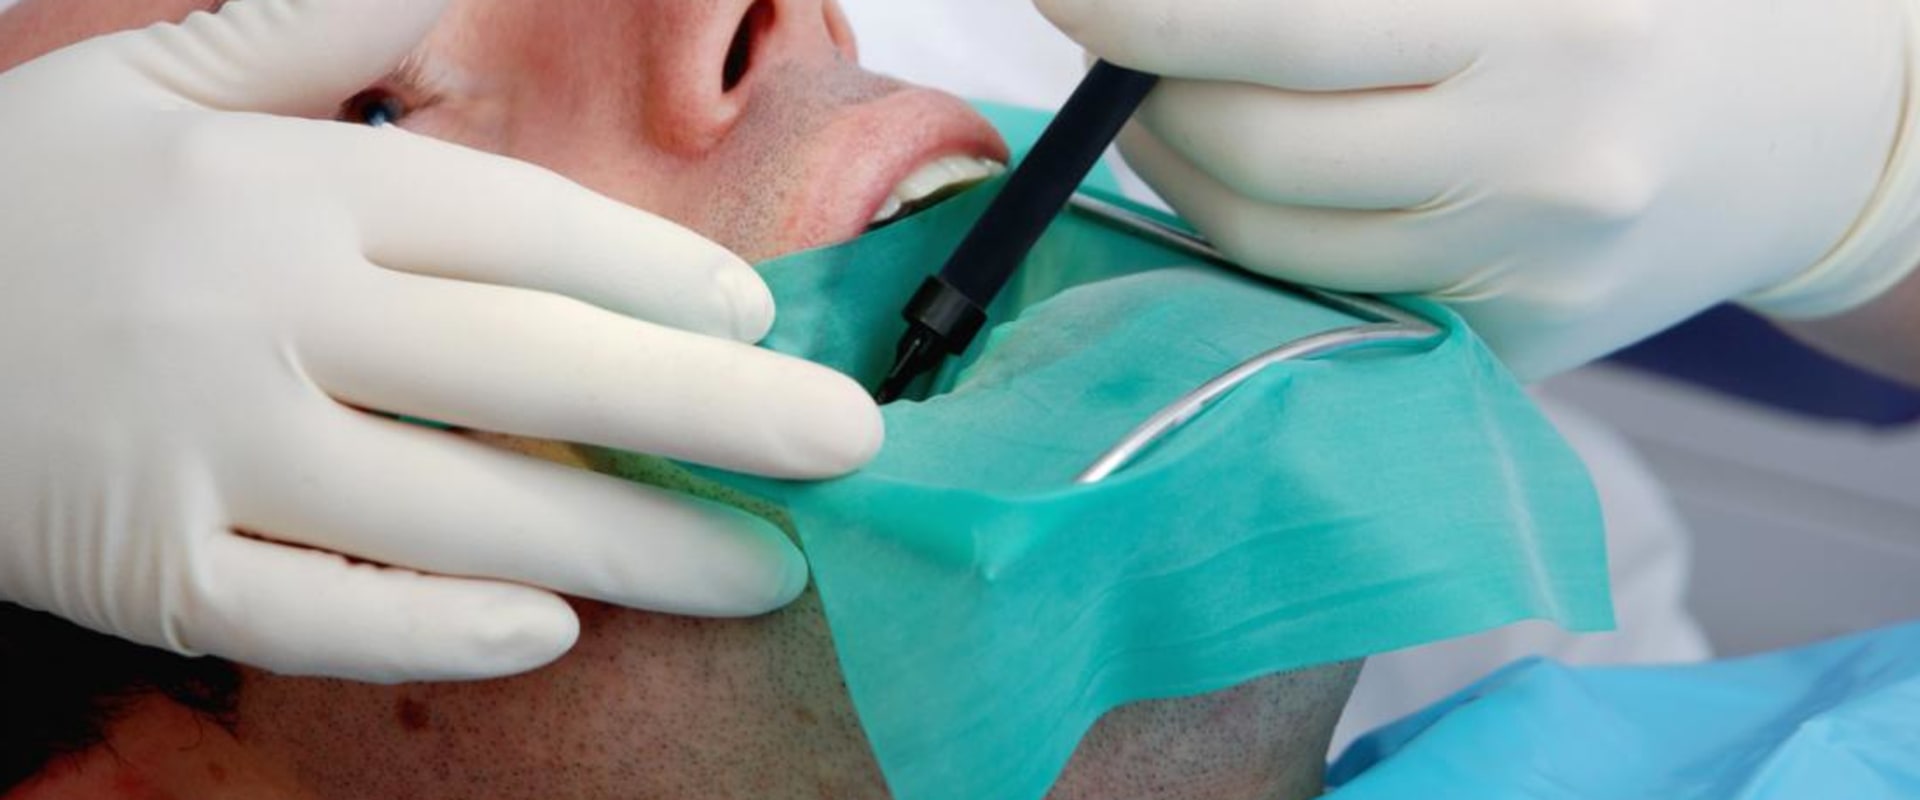 What procedures does an endodontist do?